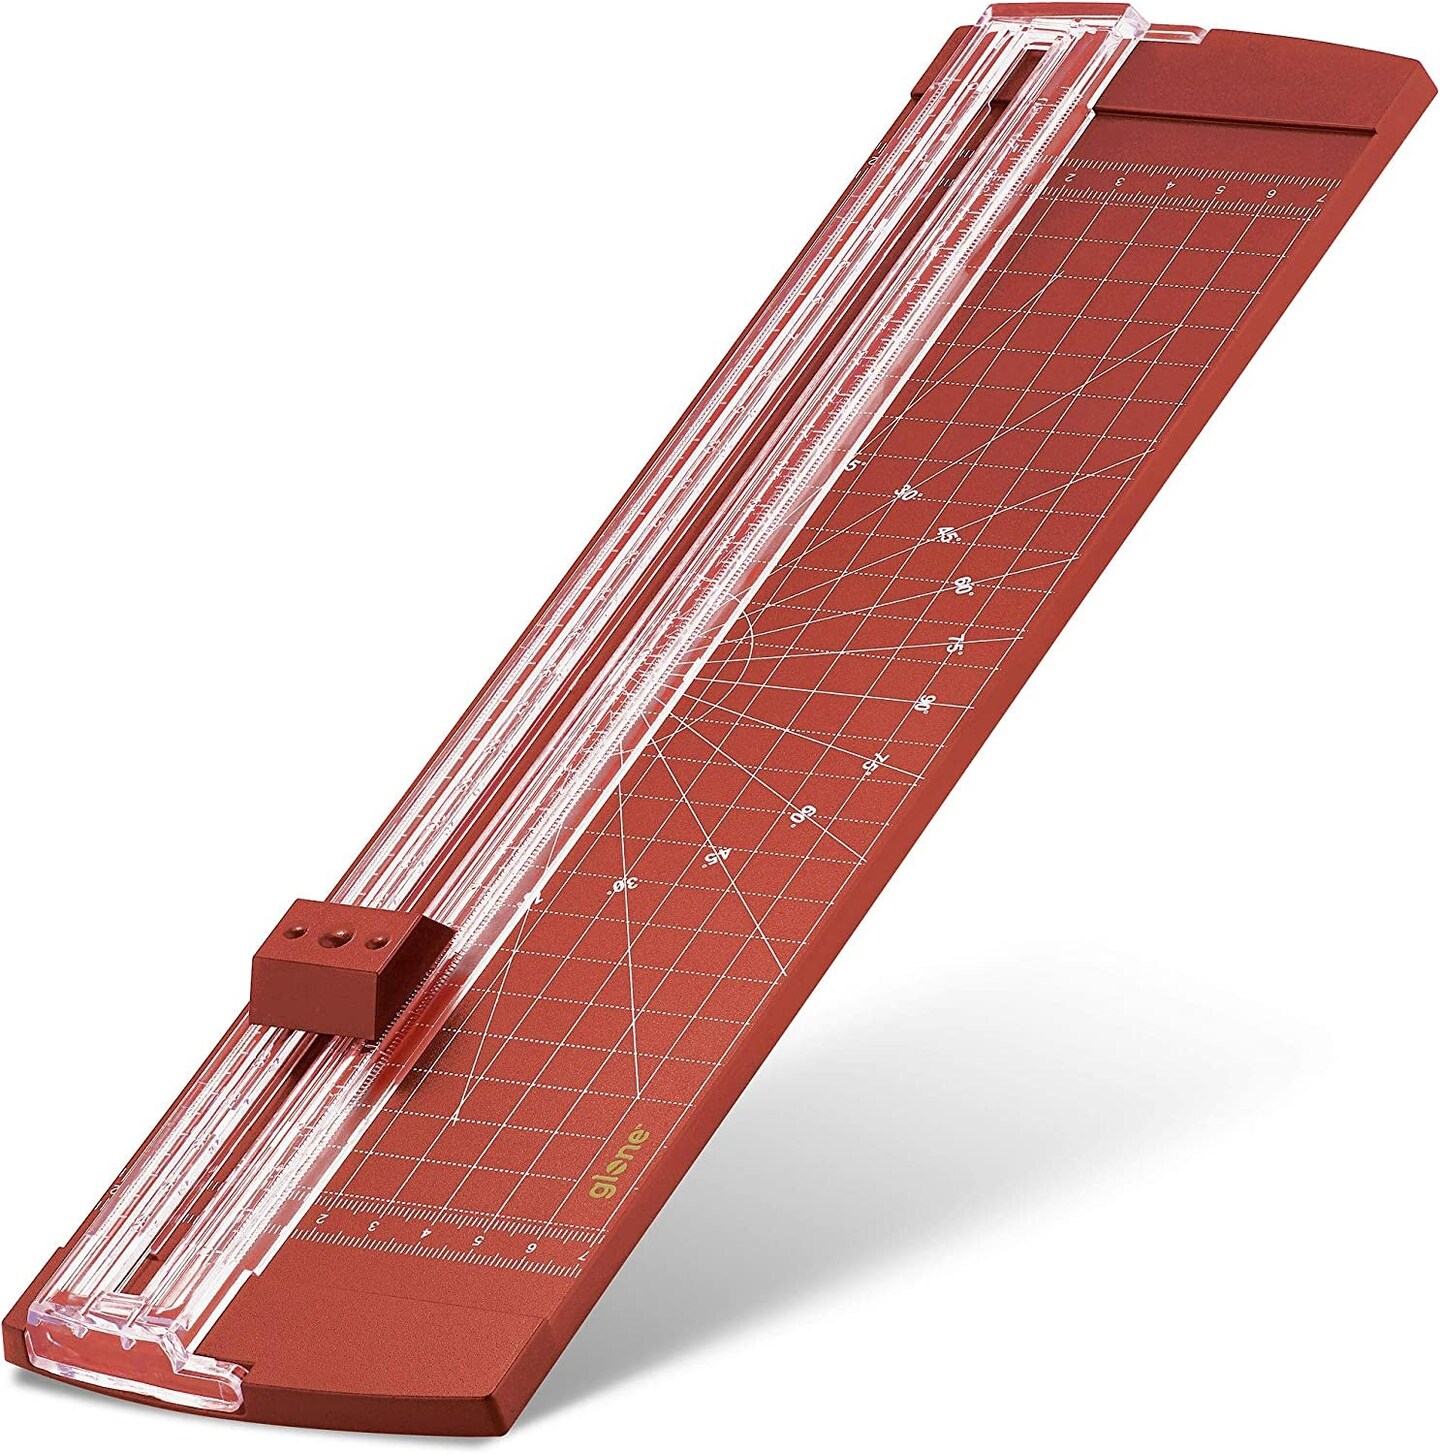 12 Inch Paper Trimmer, A4 Size Paper Cutter with Automatic